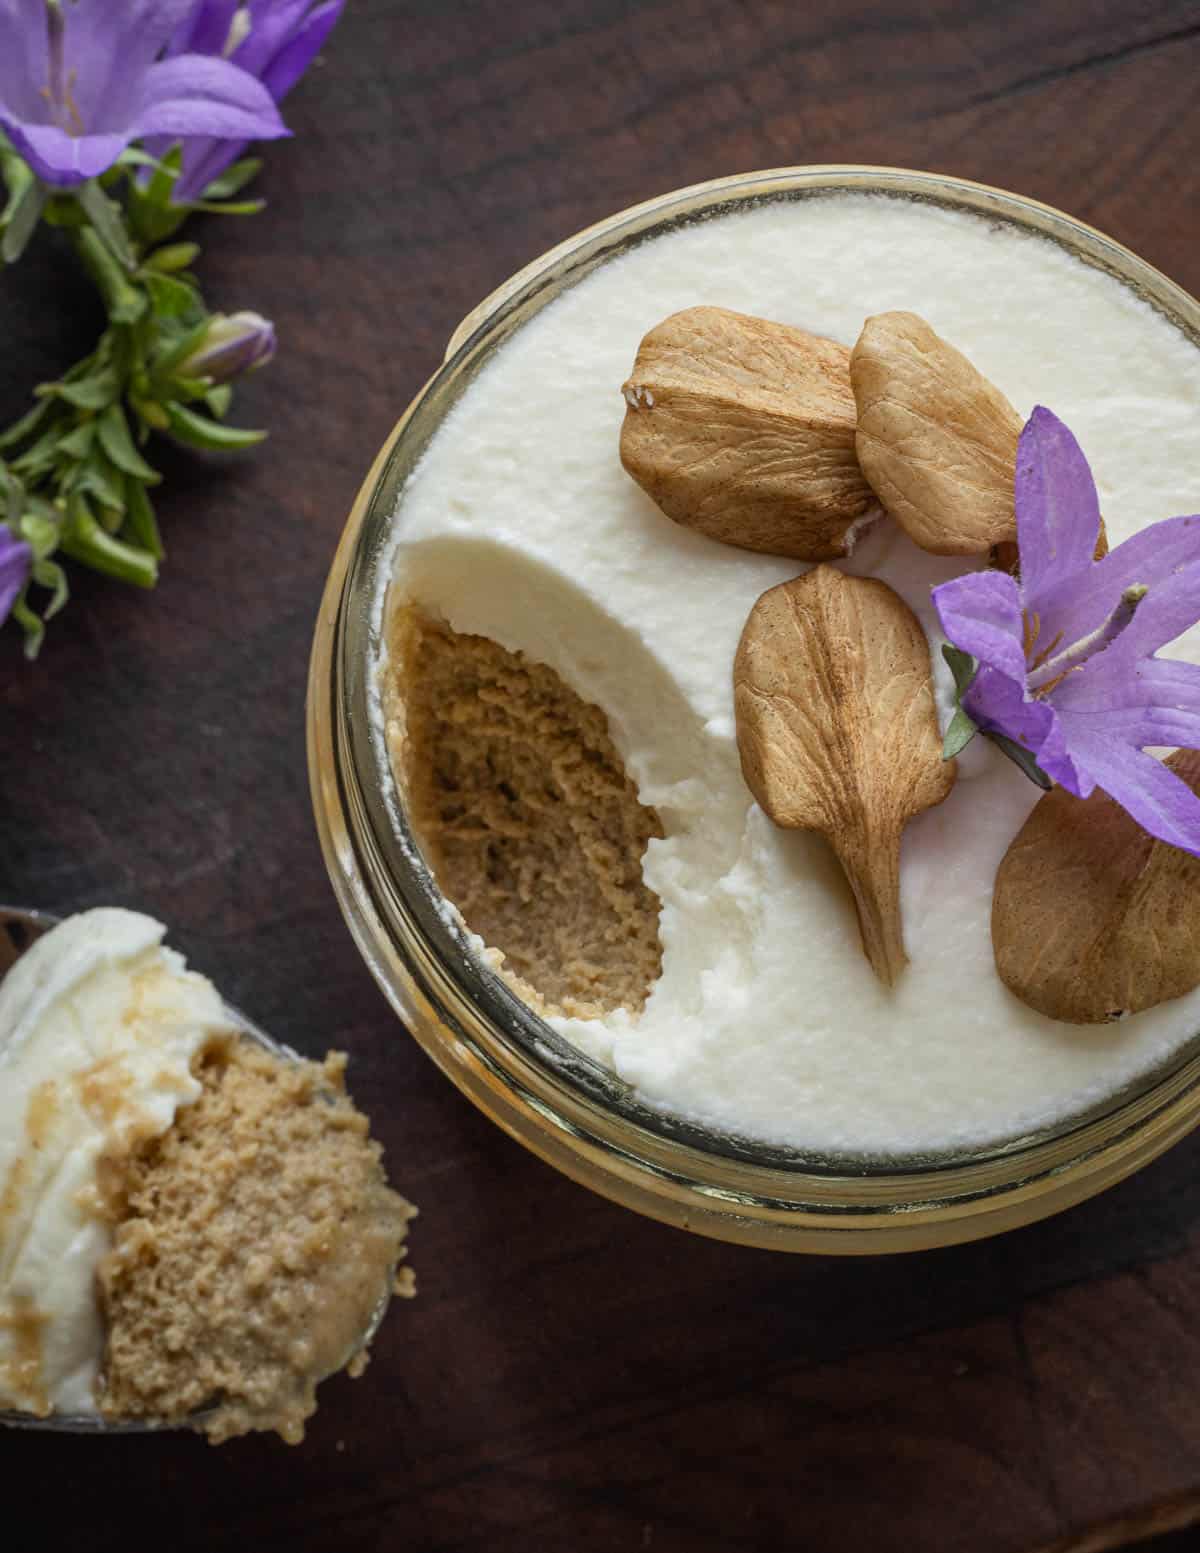 Top down image of Linden seed custard garnished with fresh butternuts or white walnuts, whipped cream and bellflowers.